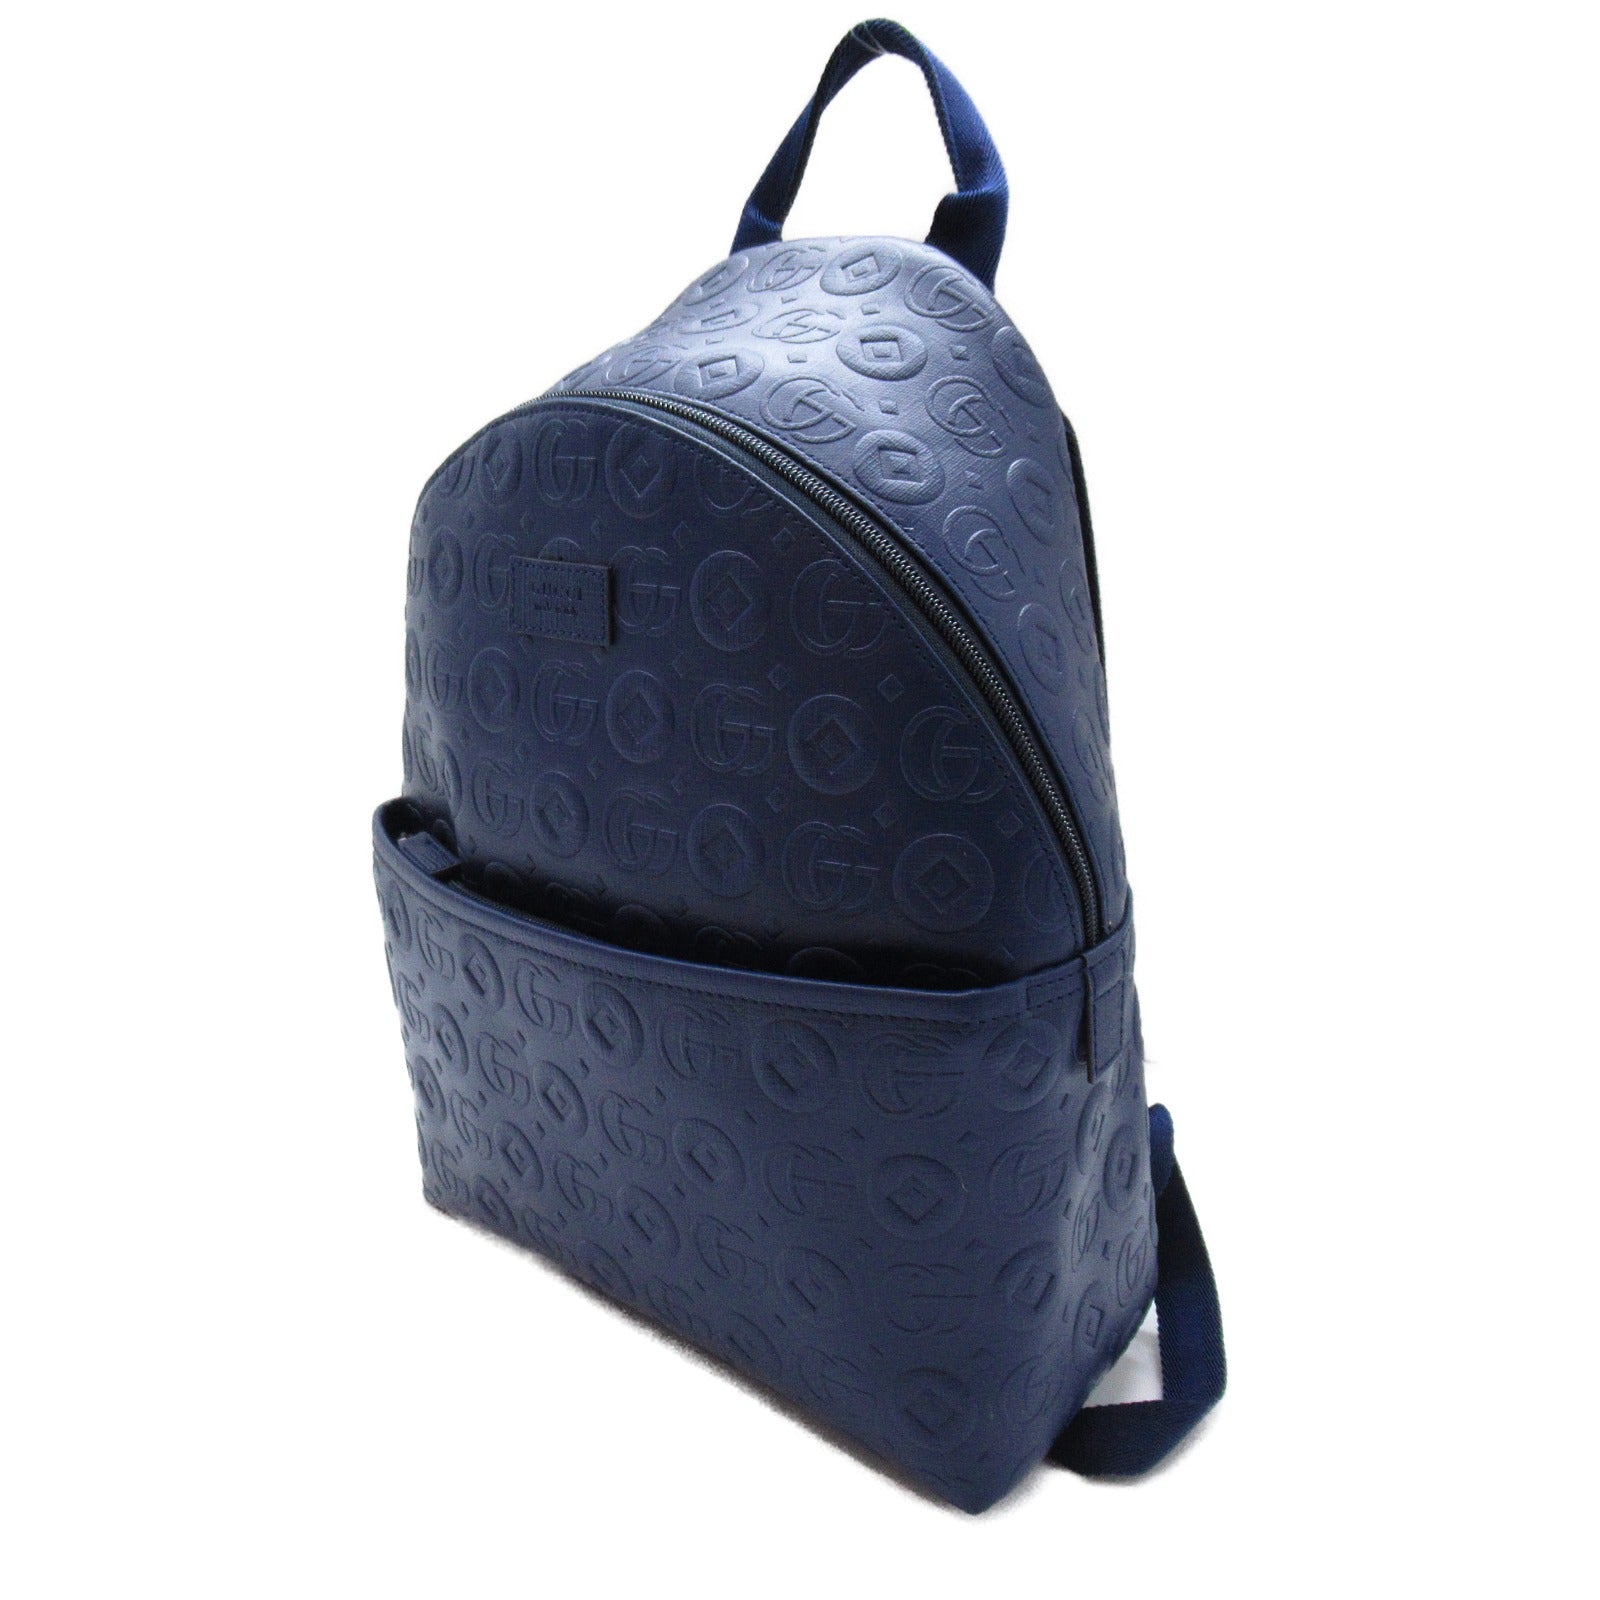 Gucci Kids Backpack Backpack Bag GG Canvas  Navy 782708FAC4E9771